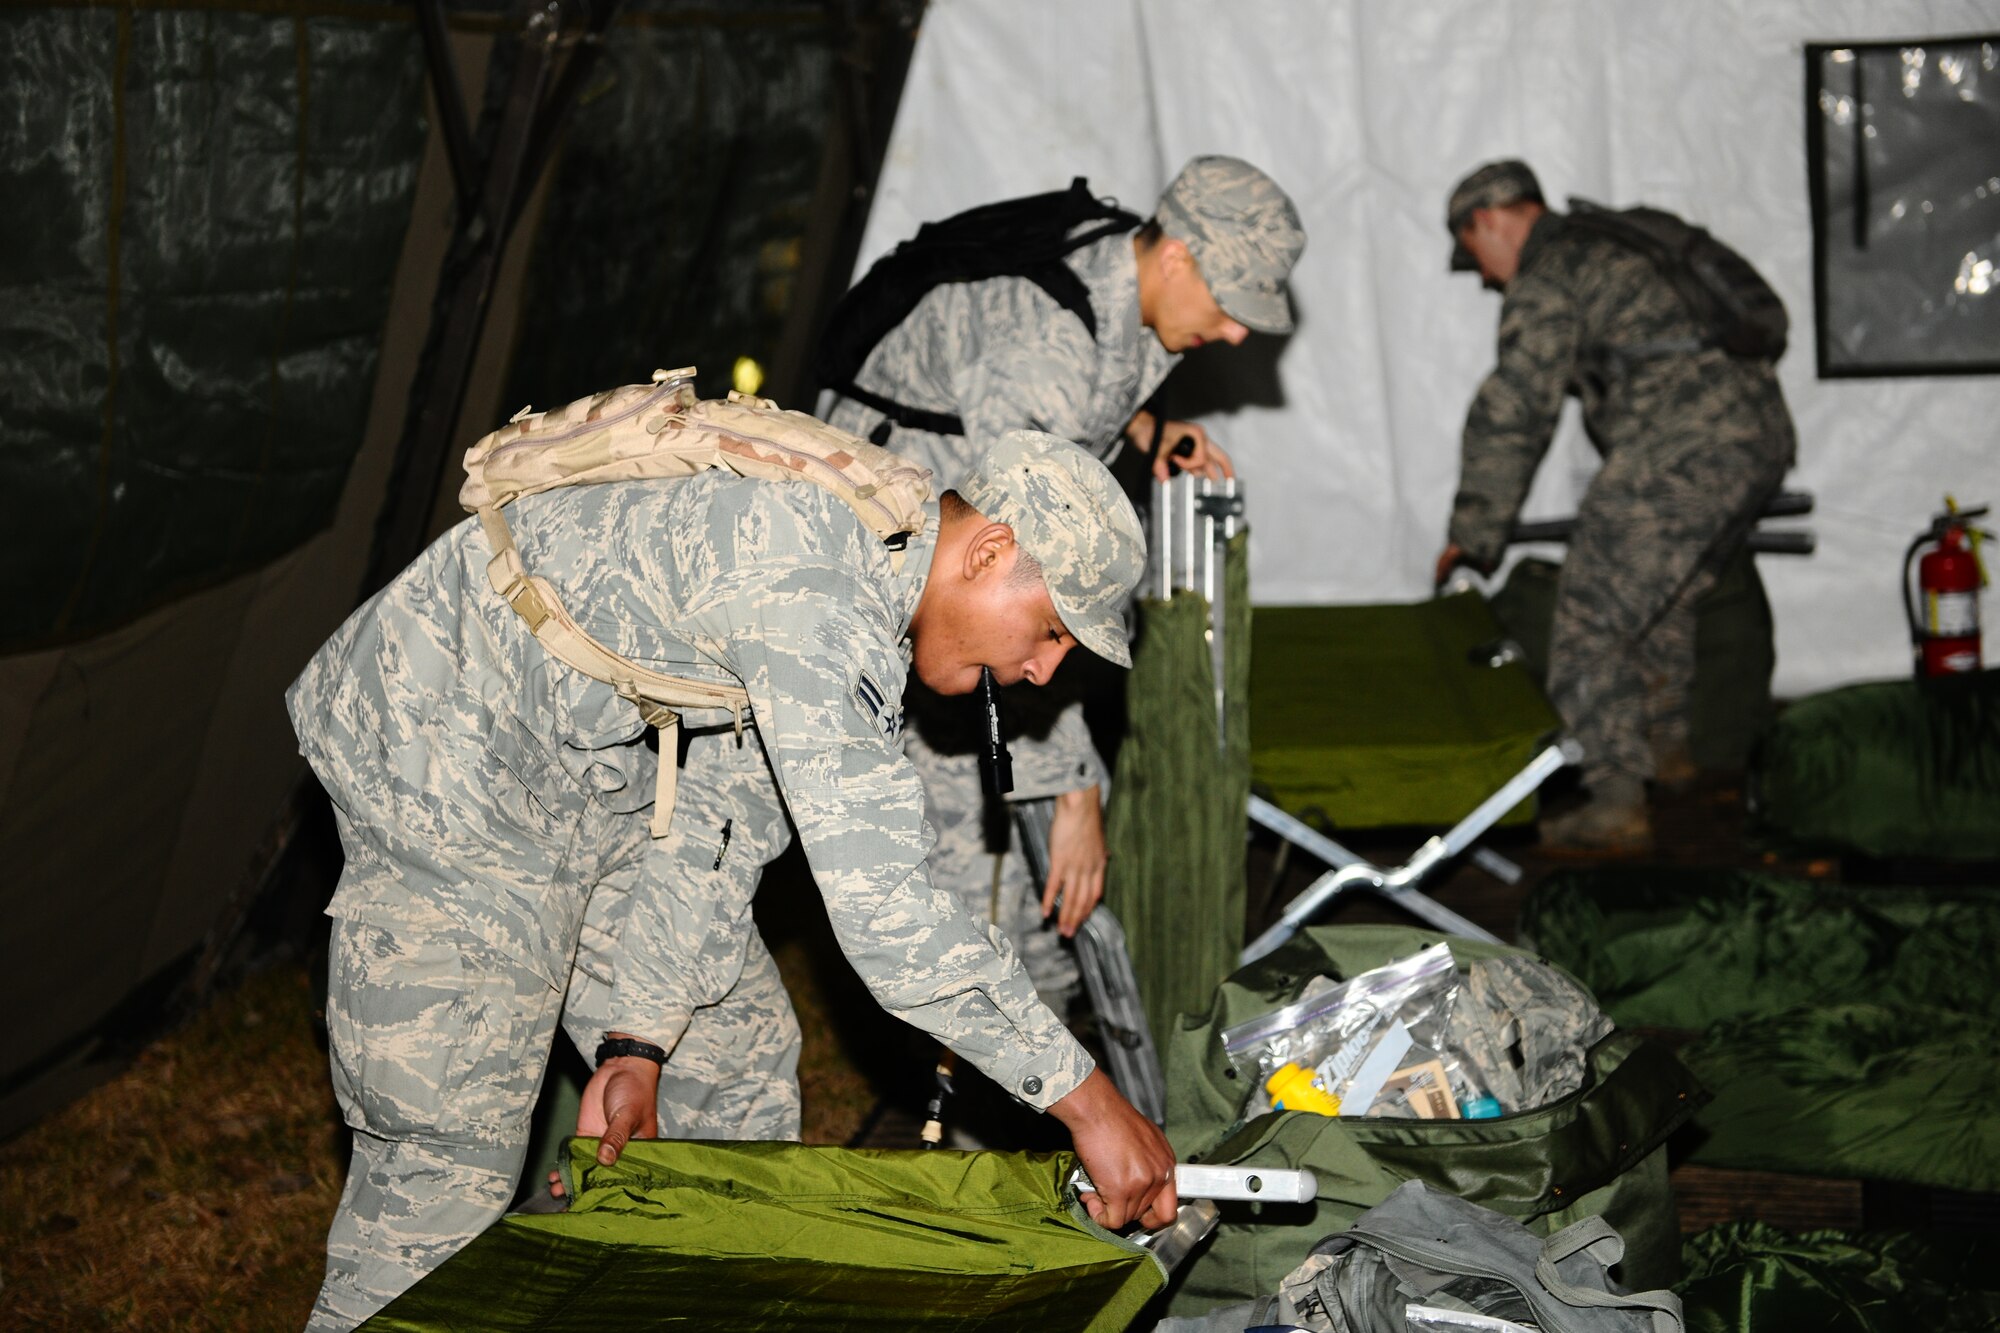 SPANGDAHLEM AIR BASE, Germany – Airman 1st Class Vicente Mattocks, left, 606th Air Control Squadro; Staff Sgt. Edgar Corona, center, 52nd Medical Operations Squadron; and Senior Airman Sean Reval, 52nd Security Forces Squadron, set up cots inside a Tent Extendable Modular Personnel tent during a Ranger training course here March 1. The required three-day course prepares Airmen for what they will be tested on during the U.S. Army Ranger pre-assessment training course. The pre-assessment course tests service members physically and mentally with challenges ranging from ruck marching to battle survival tactics. Out of the five Airmen enrolled in the training, Senior Airman Sean Reval, 52nd Security Forces Squadron, and Senior Airman Coty Raphael, 52nd Medical Operations Squadron, were the only participants to qualify to continue on to Ranger pre-assessment training at Sembach Air Base, Germany. (U.S. Air Force photo by Airman 1st Class Dillon Davis/Released)